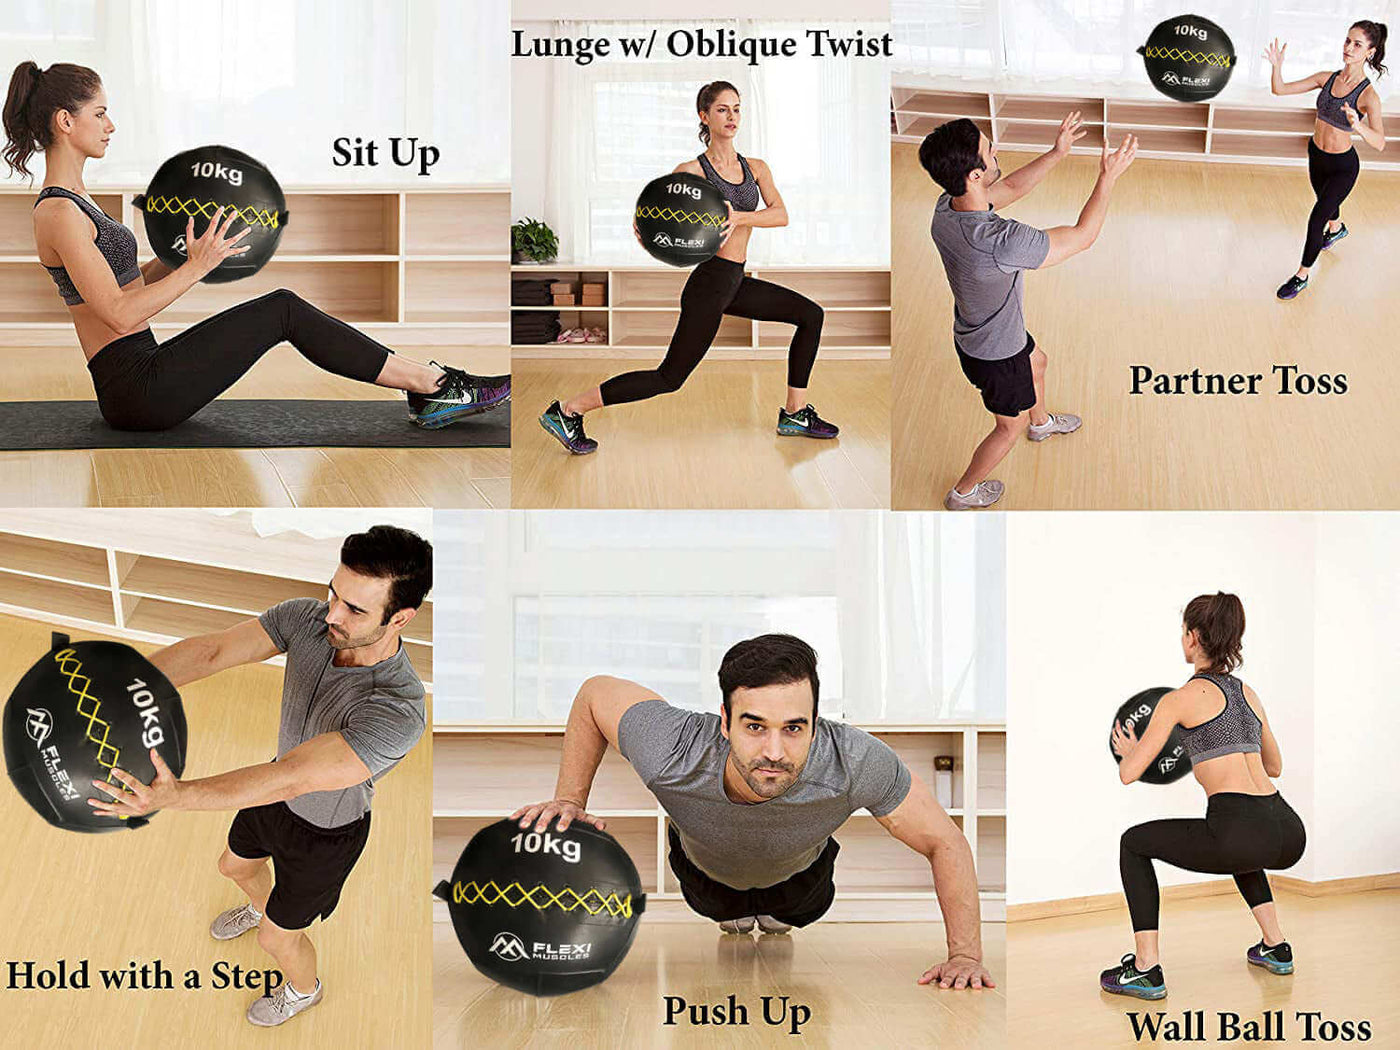 Flexi Muscles -Leather Medicine Ball for Full Body Workout.